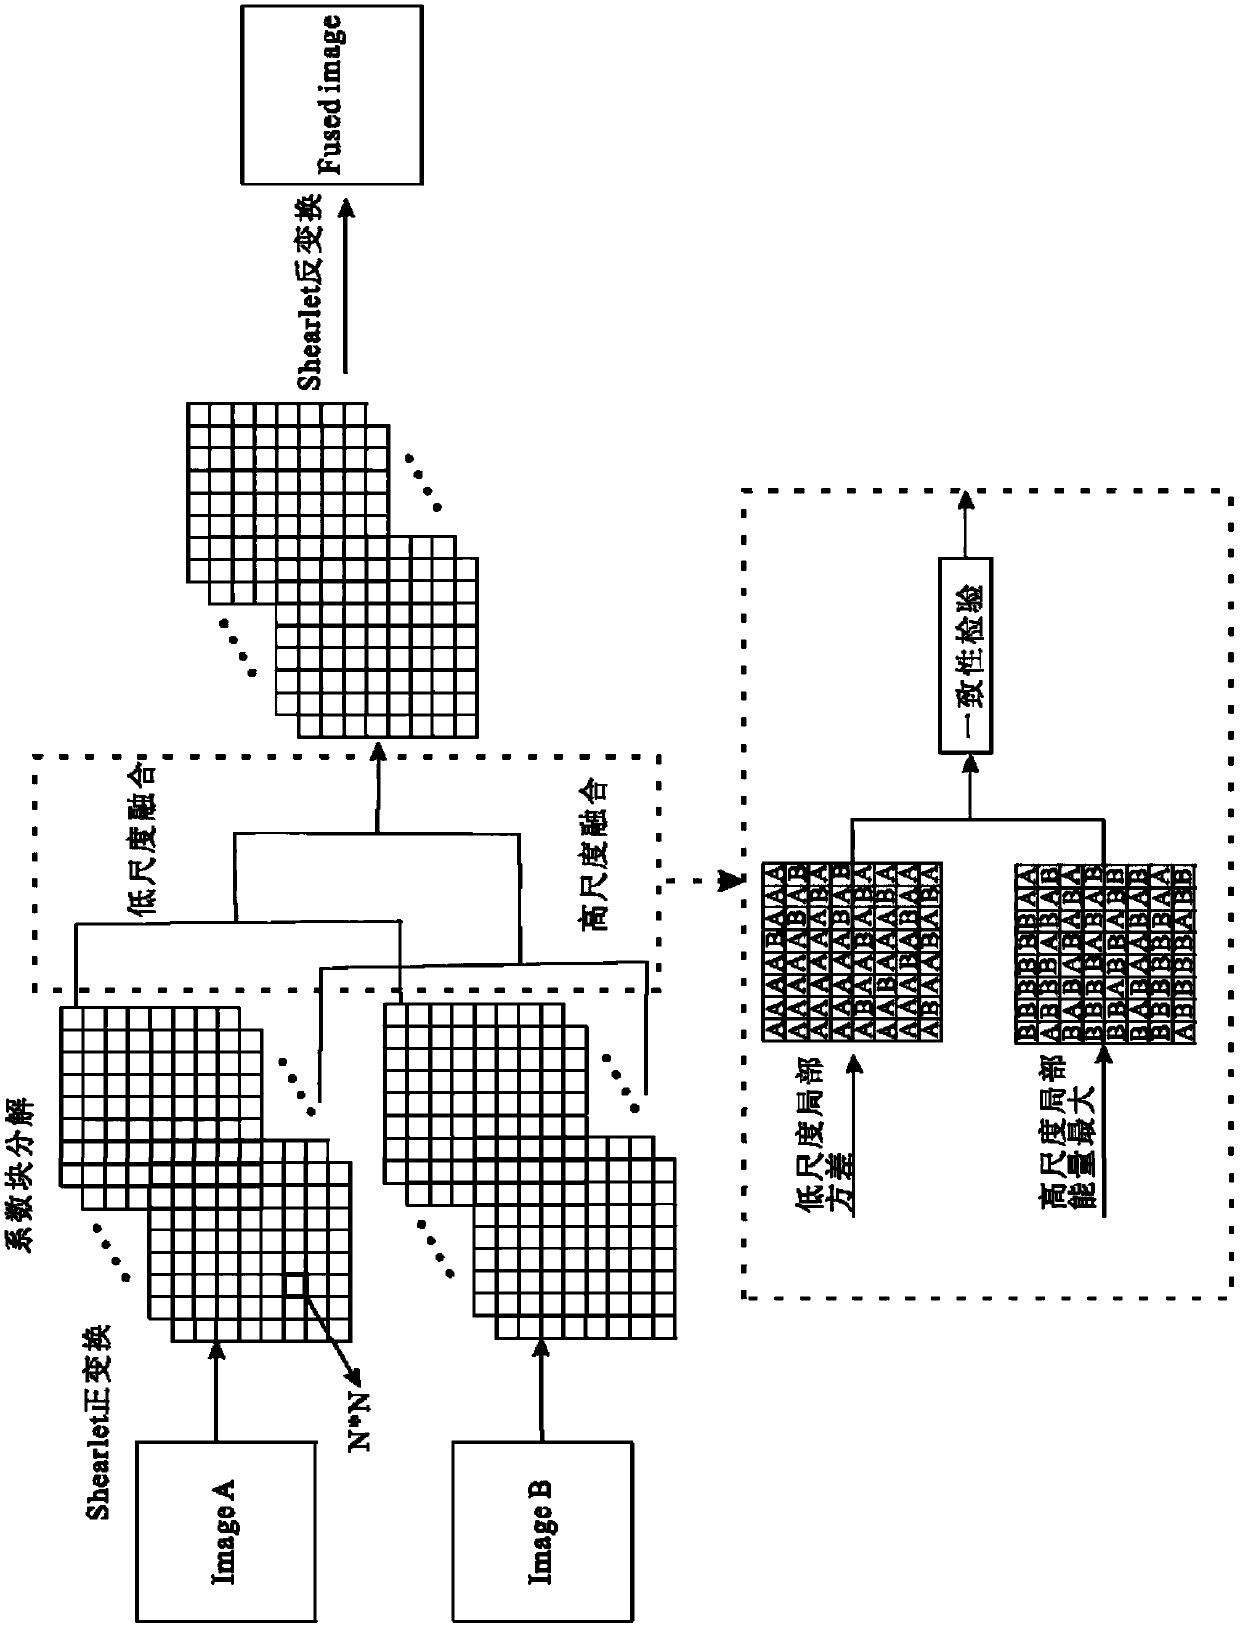 A multi-scale Shearlet domain image fusion processing method based on block decomposition